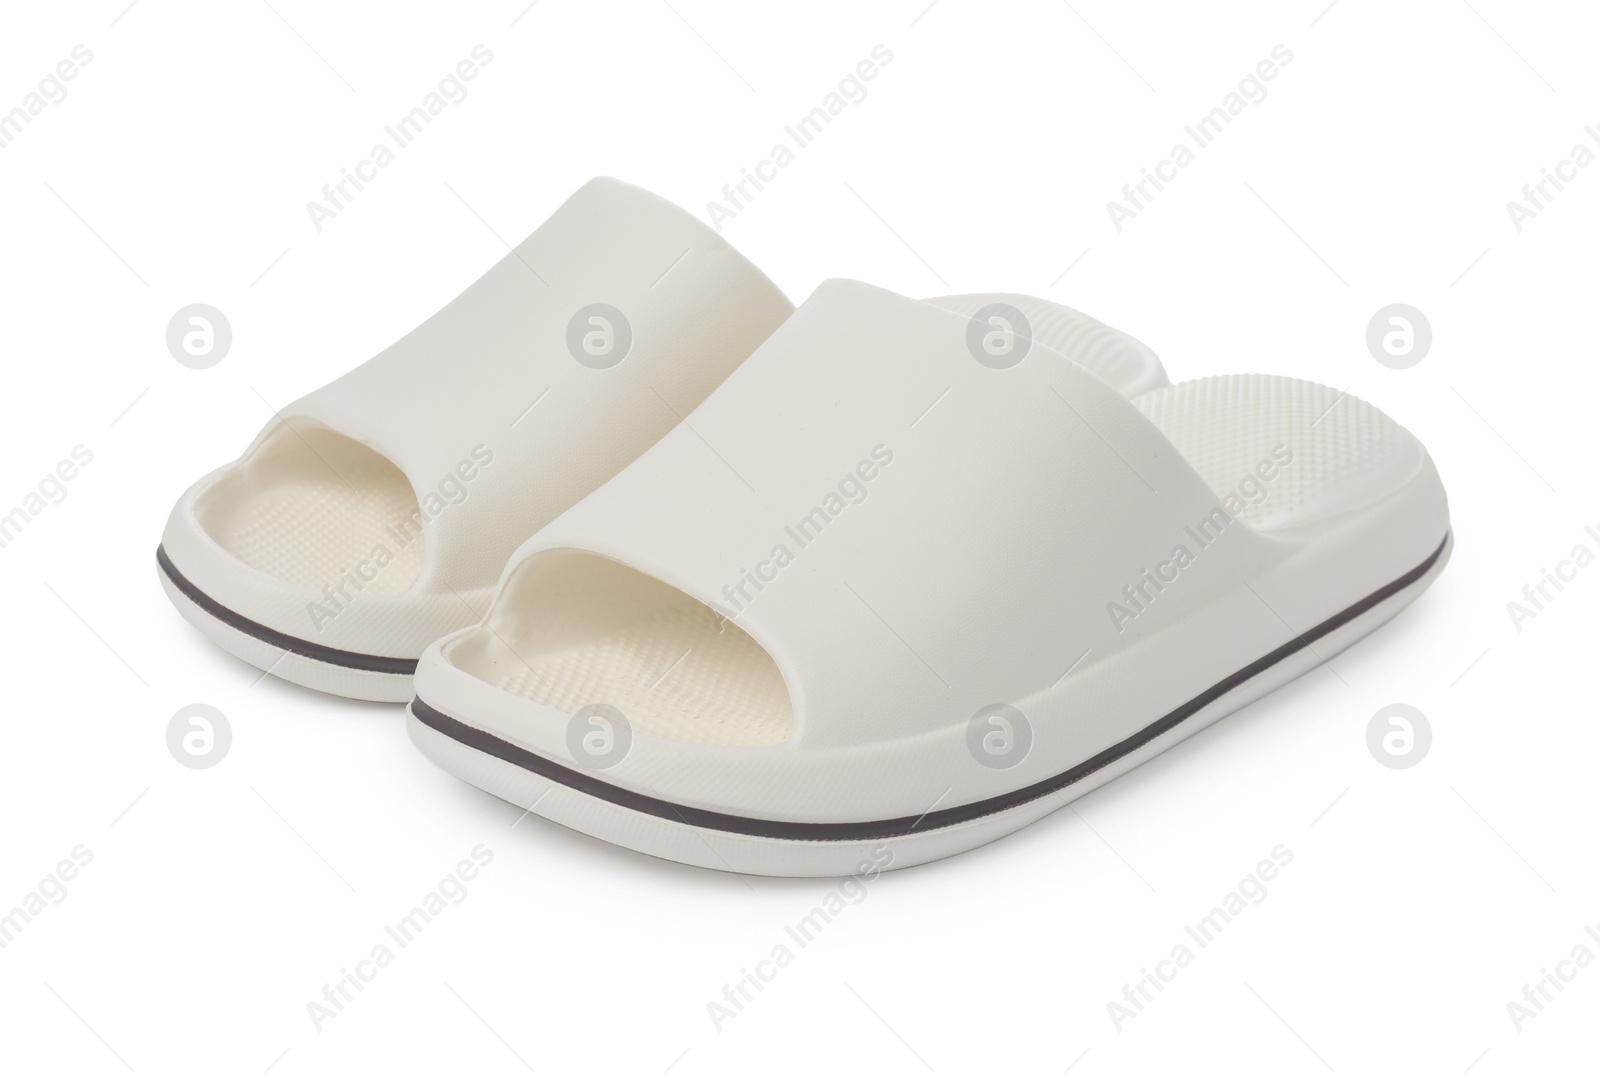 Photo of Pair of rubber slippers isolated on white